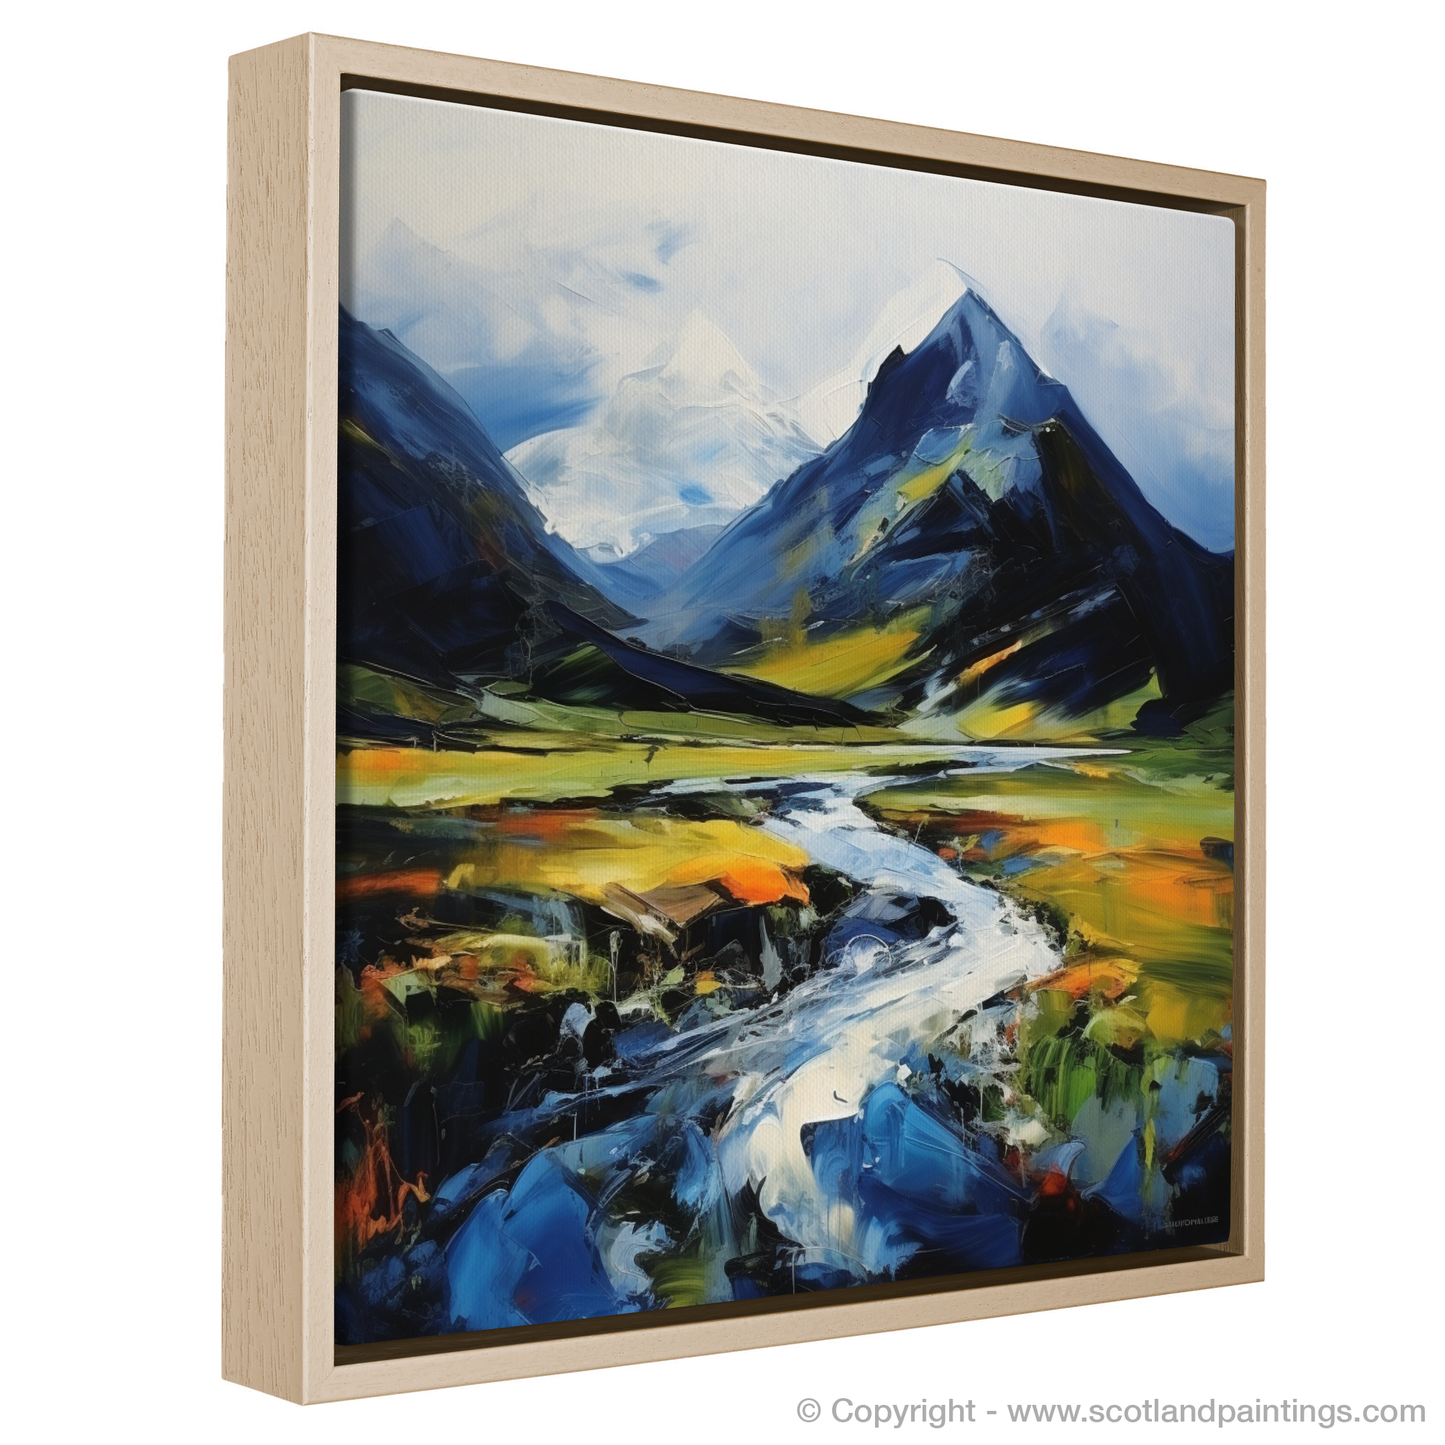 Painting and Art Print of Geal-chàrn (Drumochter) entitled "Highland Majesty: The Essence of Geal-chàrn".